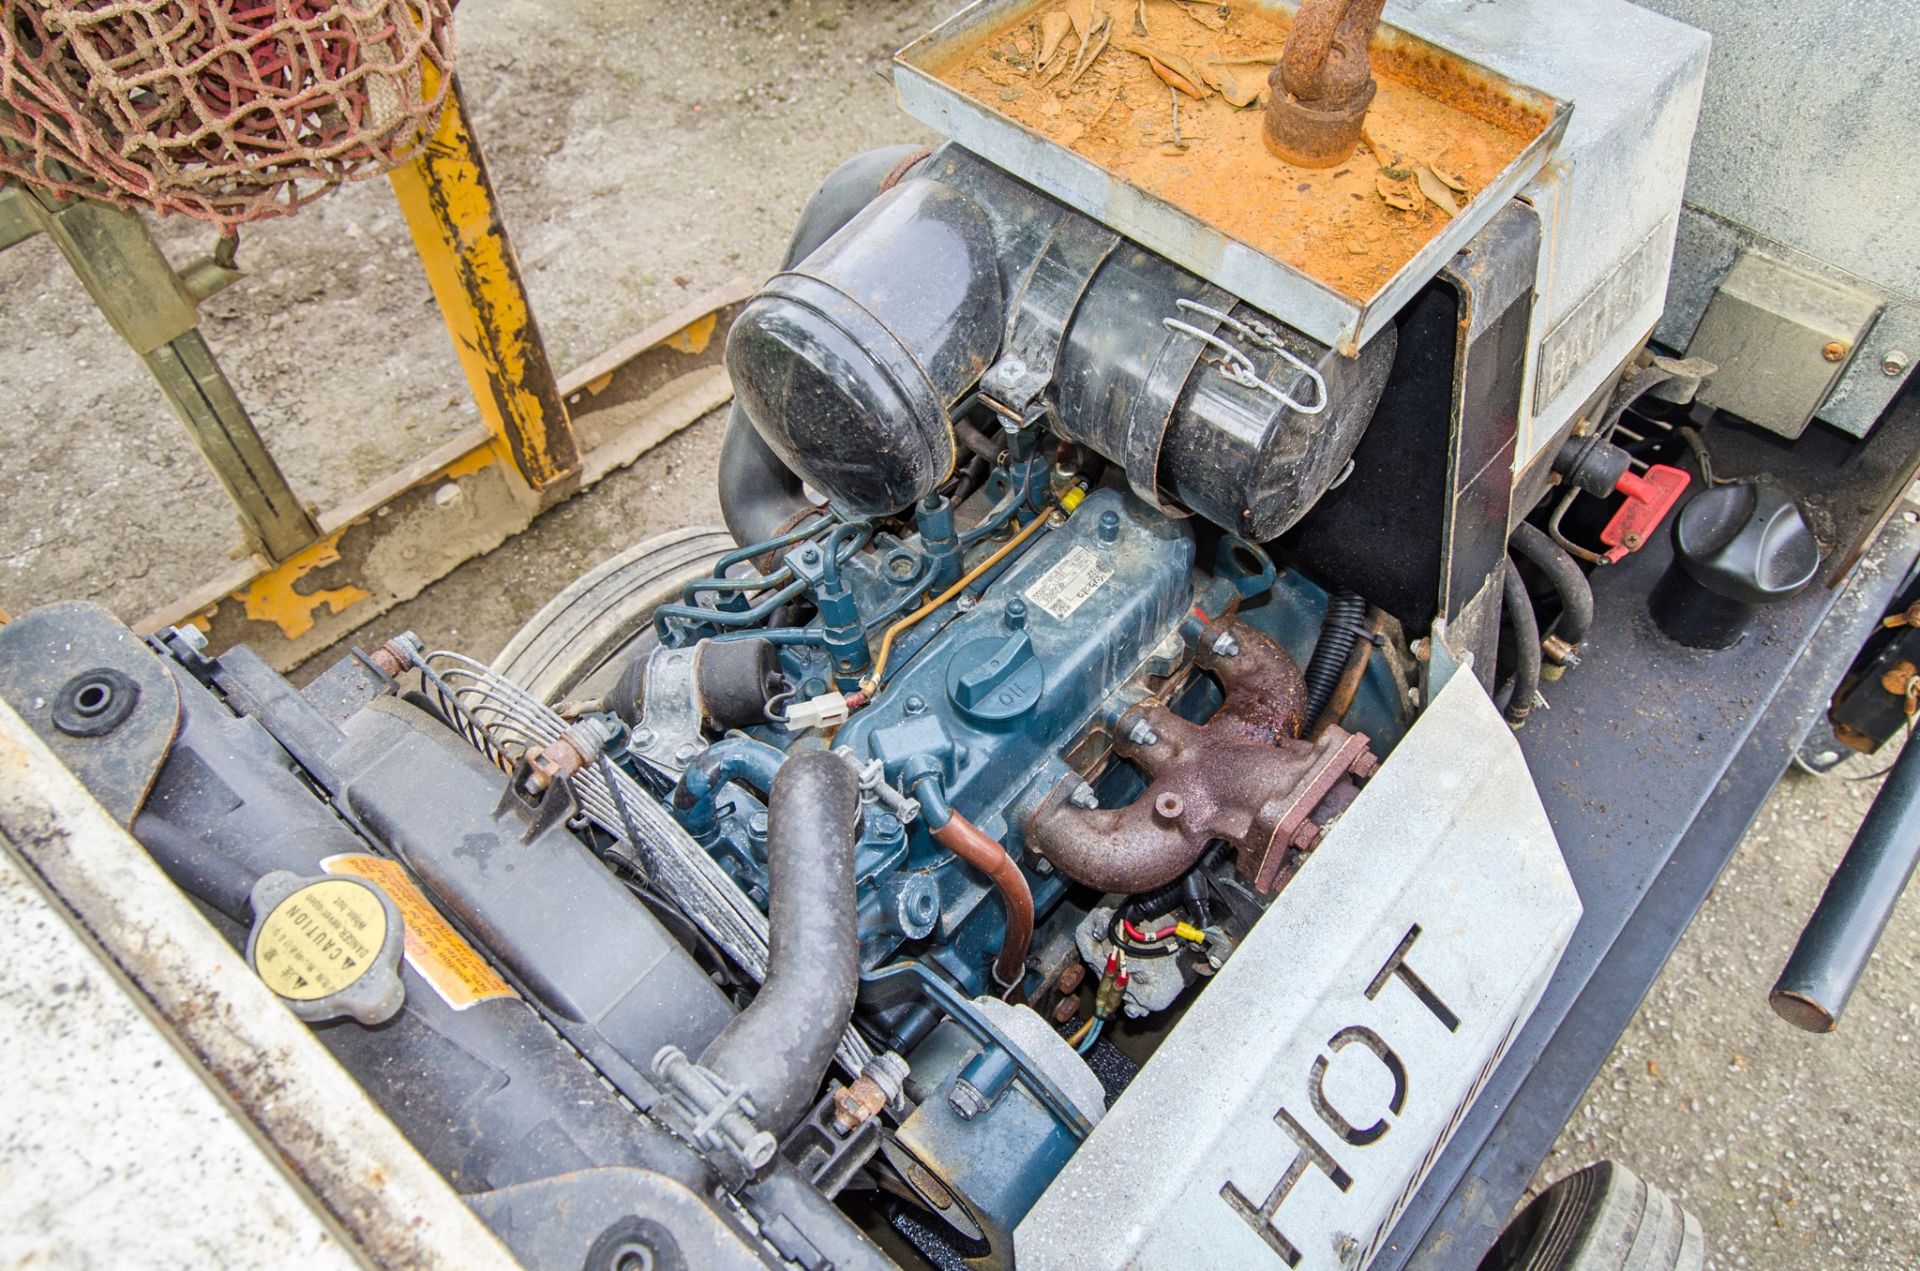 MHM MG1000 SSK-V 10 kva diesel driven generator S/N: 229150127 Recorded hours: 1867 A719406 - Image 4 of 4